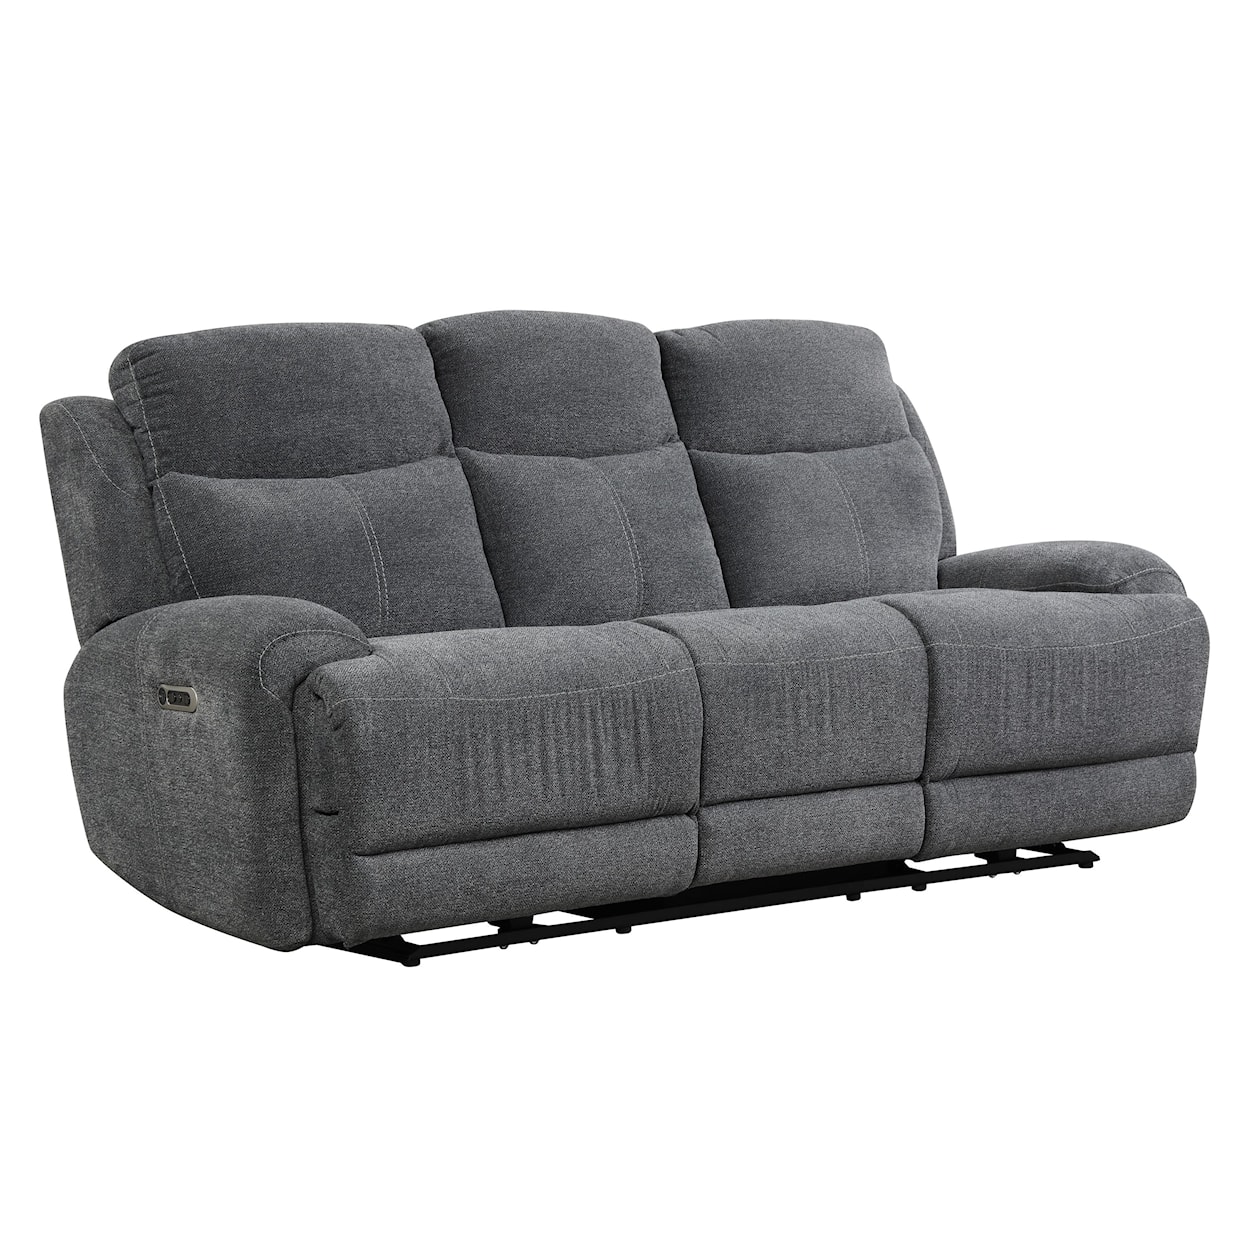 Paramount Living Bowie Power Reclining Sofa